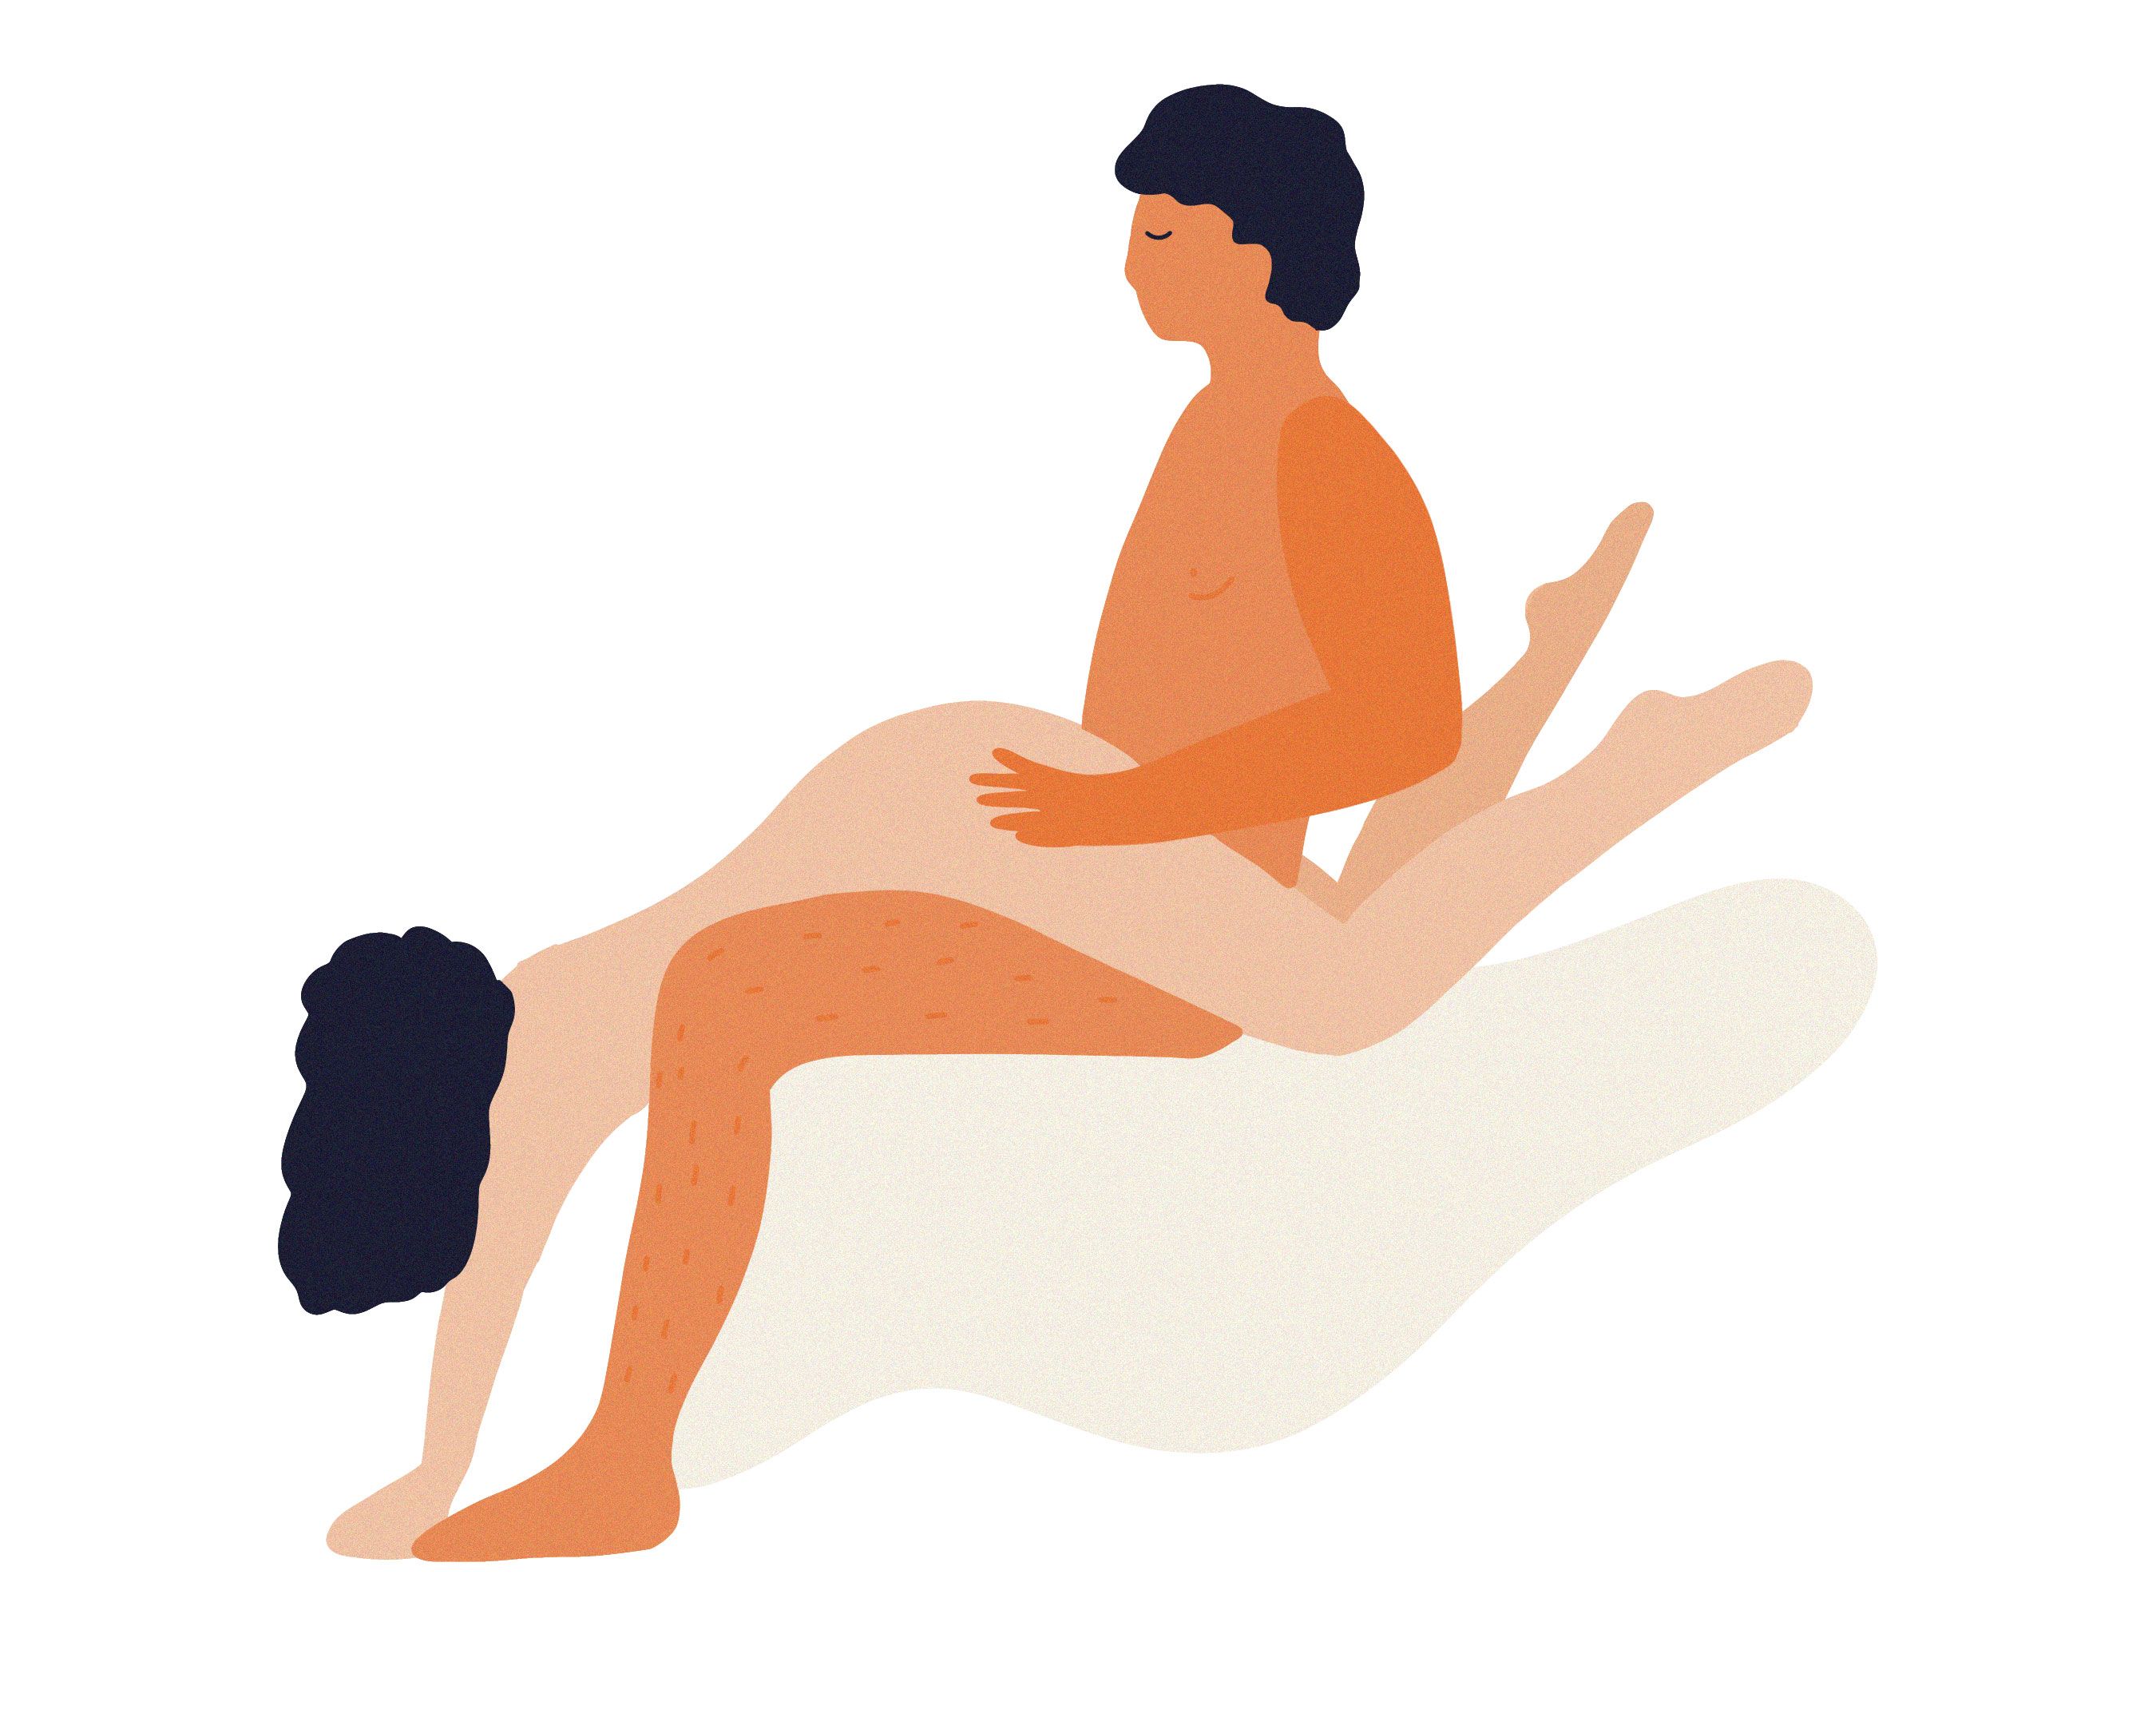 Wheel Barrow Sex Position - Wheelbarrow Sex Position: What It Is, How to Do It, Variations